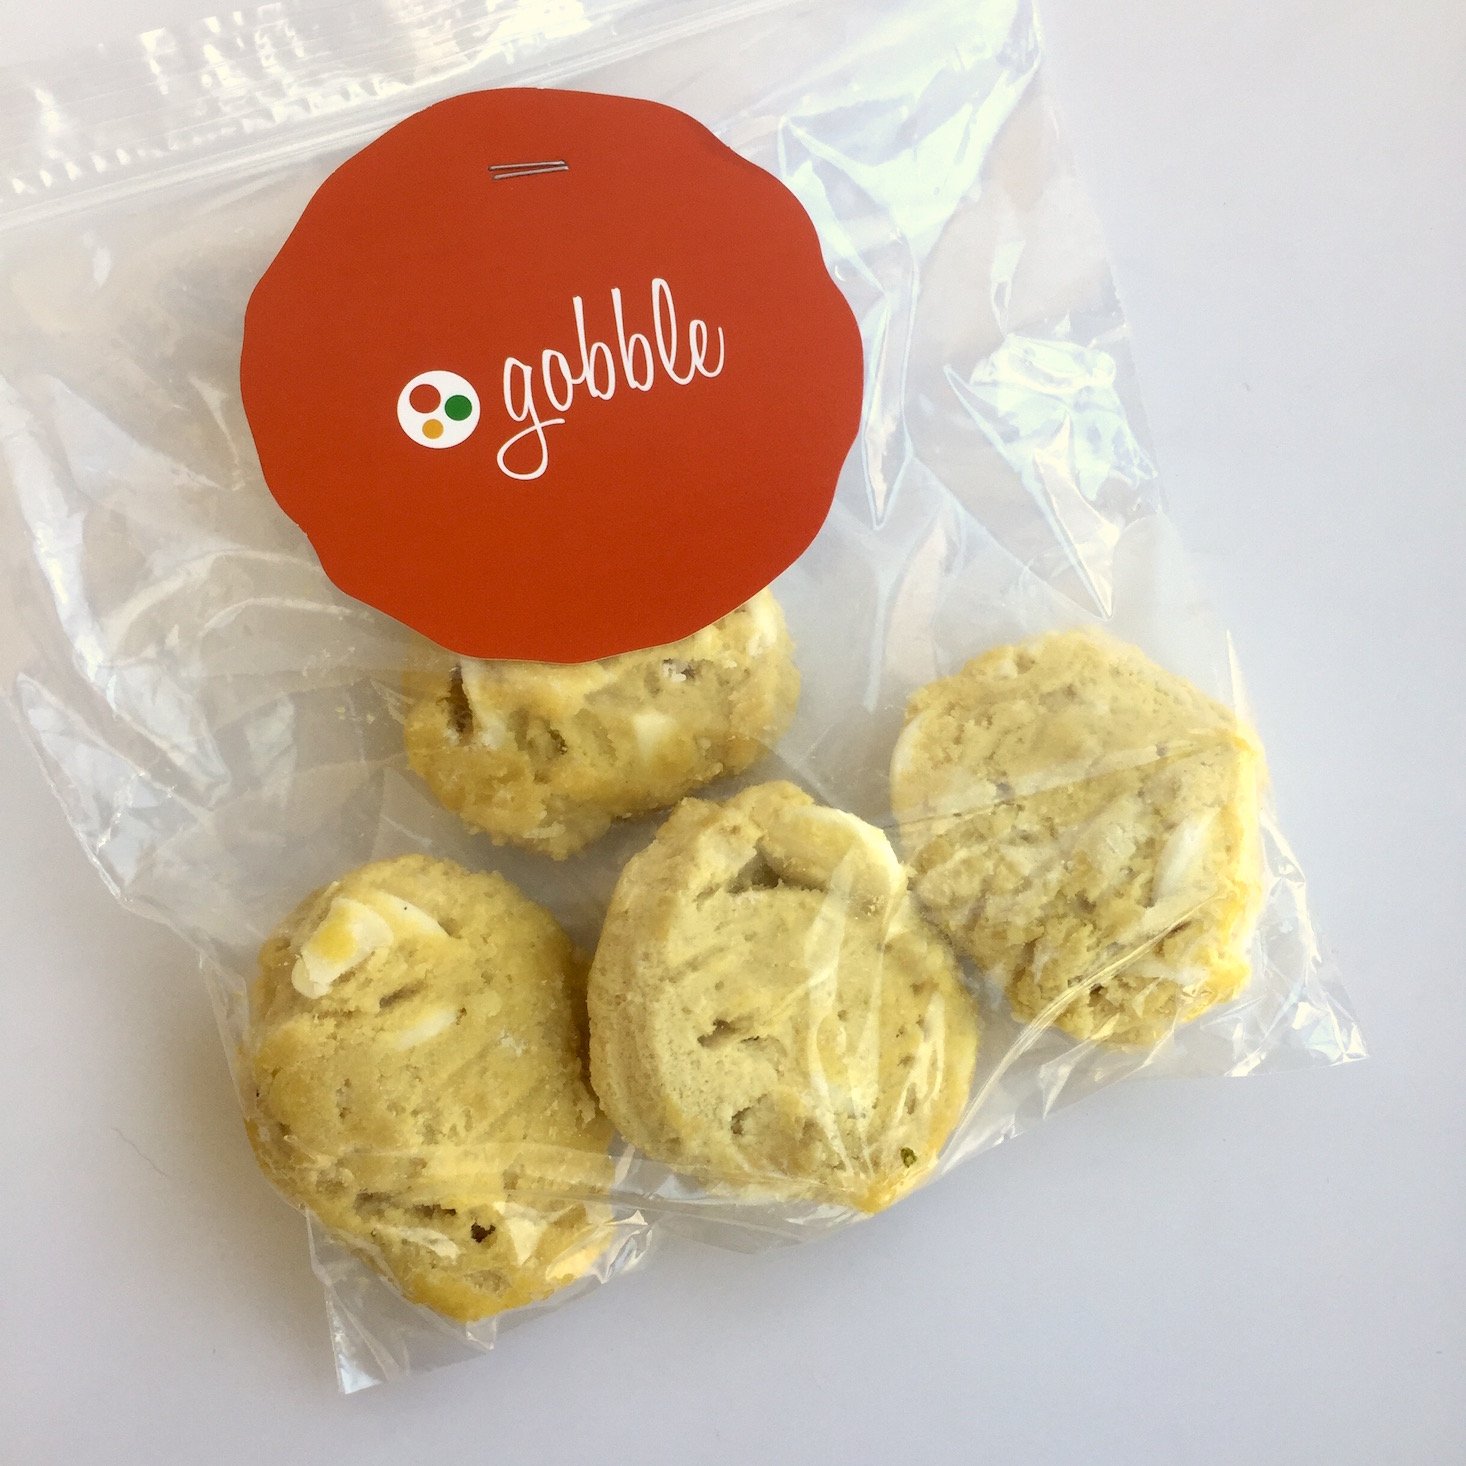 gobble-october-2016-cookies-pack